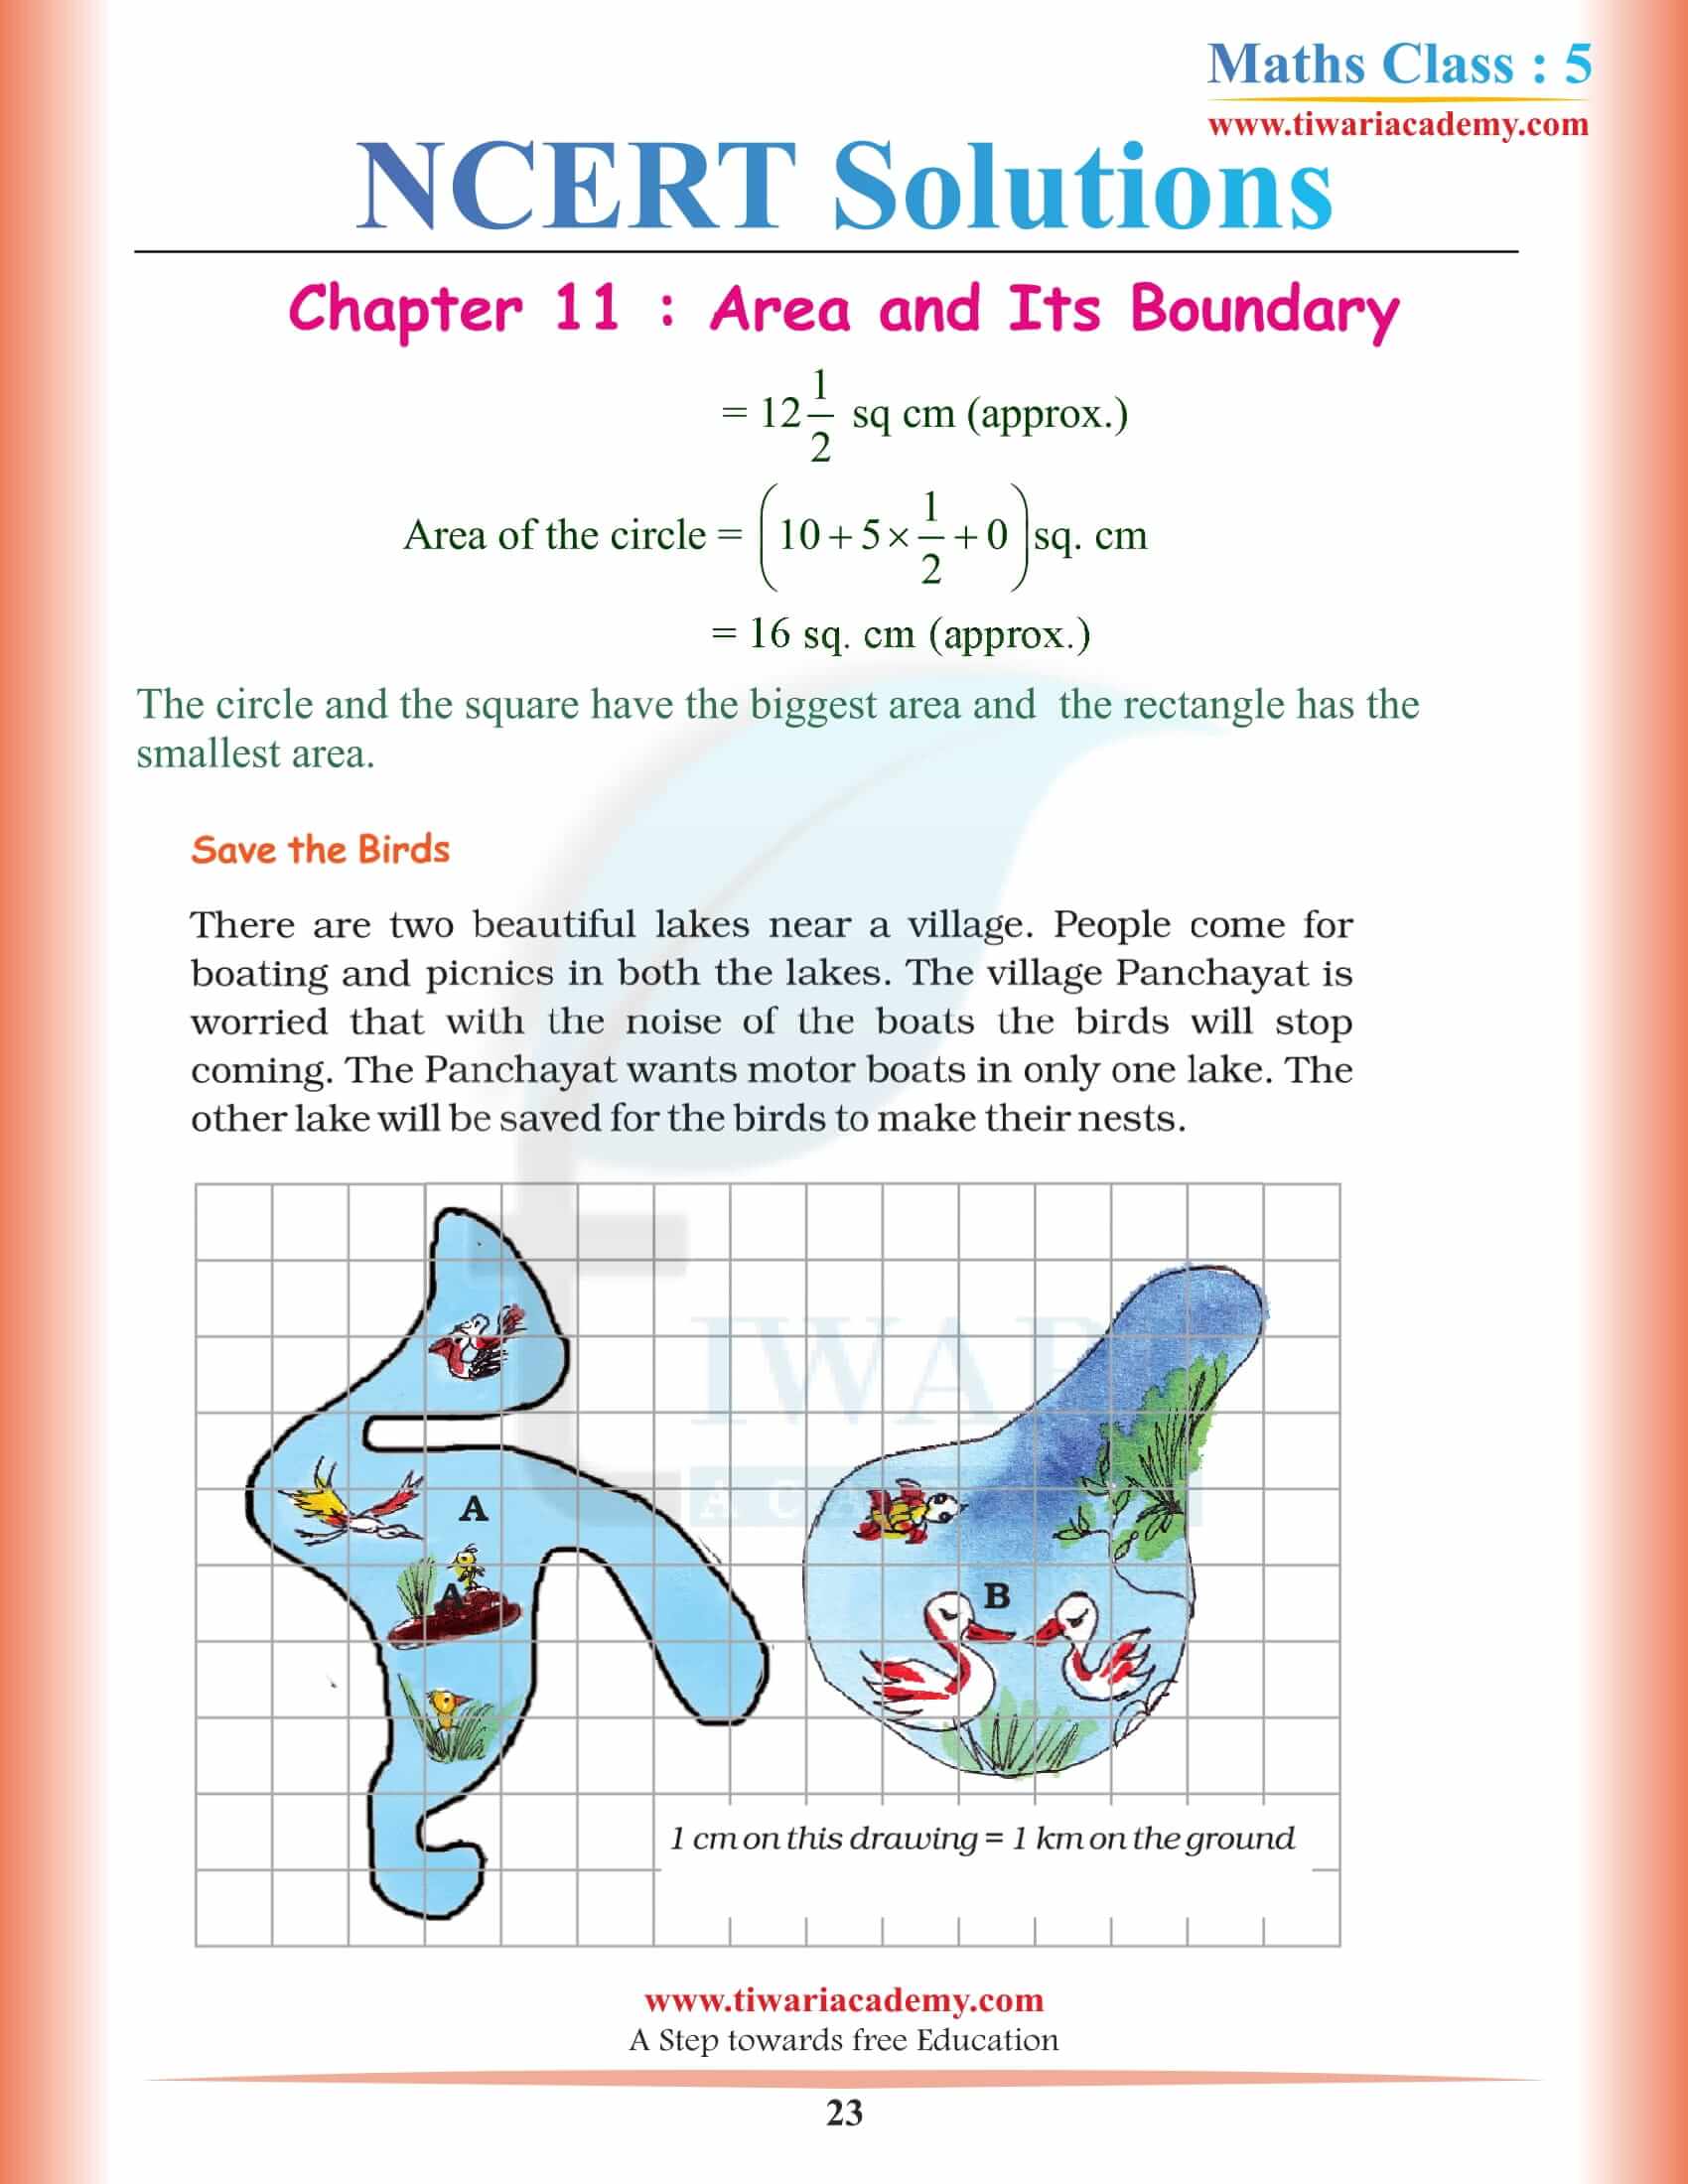 5th Math NCERT Chapter 11 Solutions Free Download